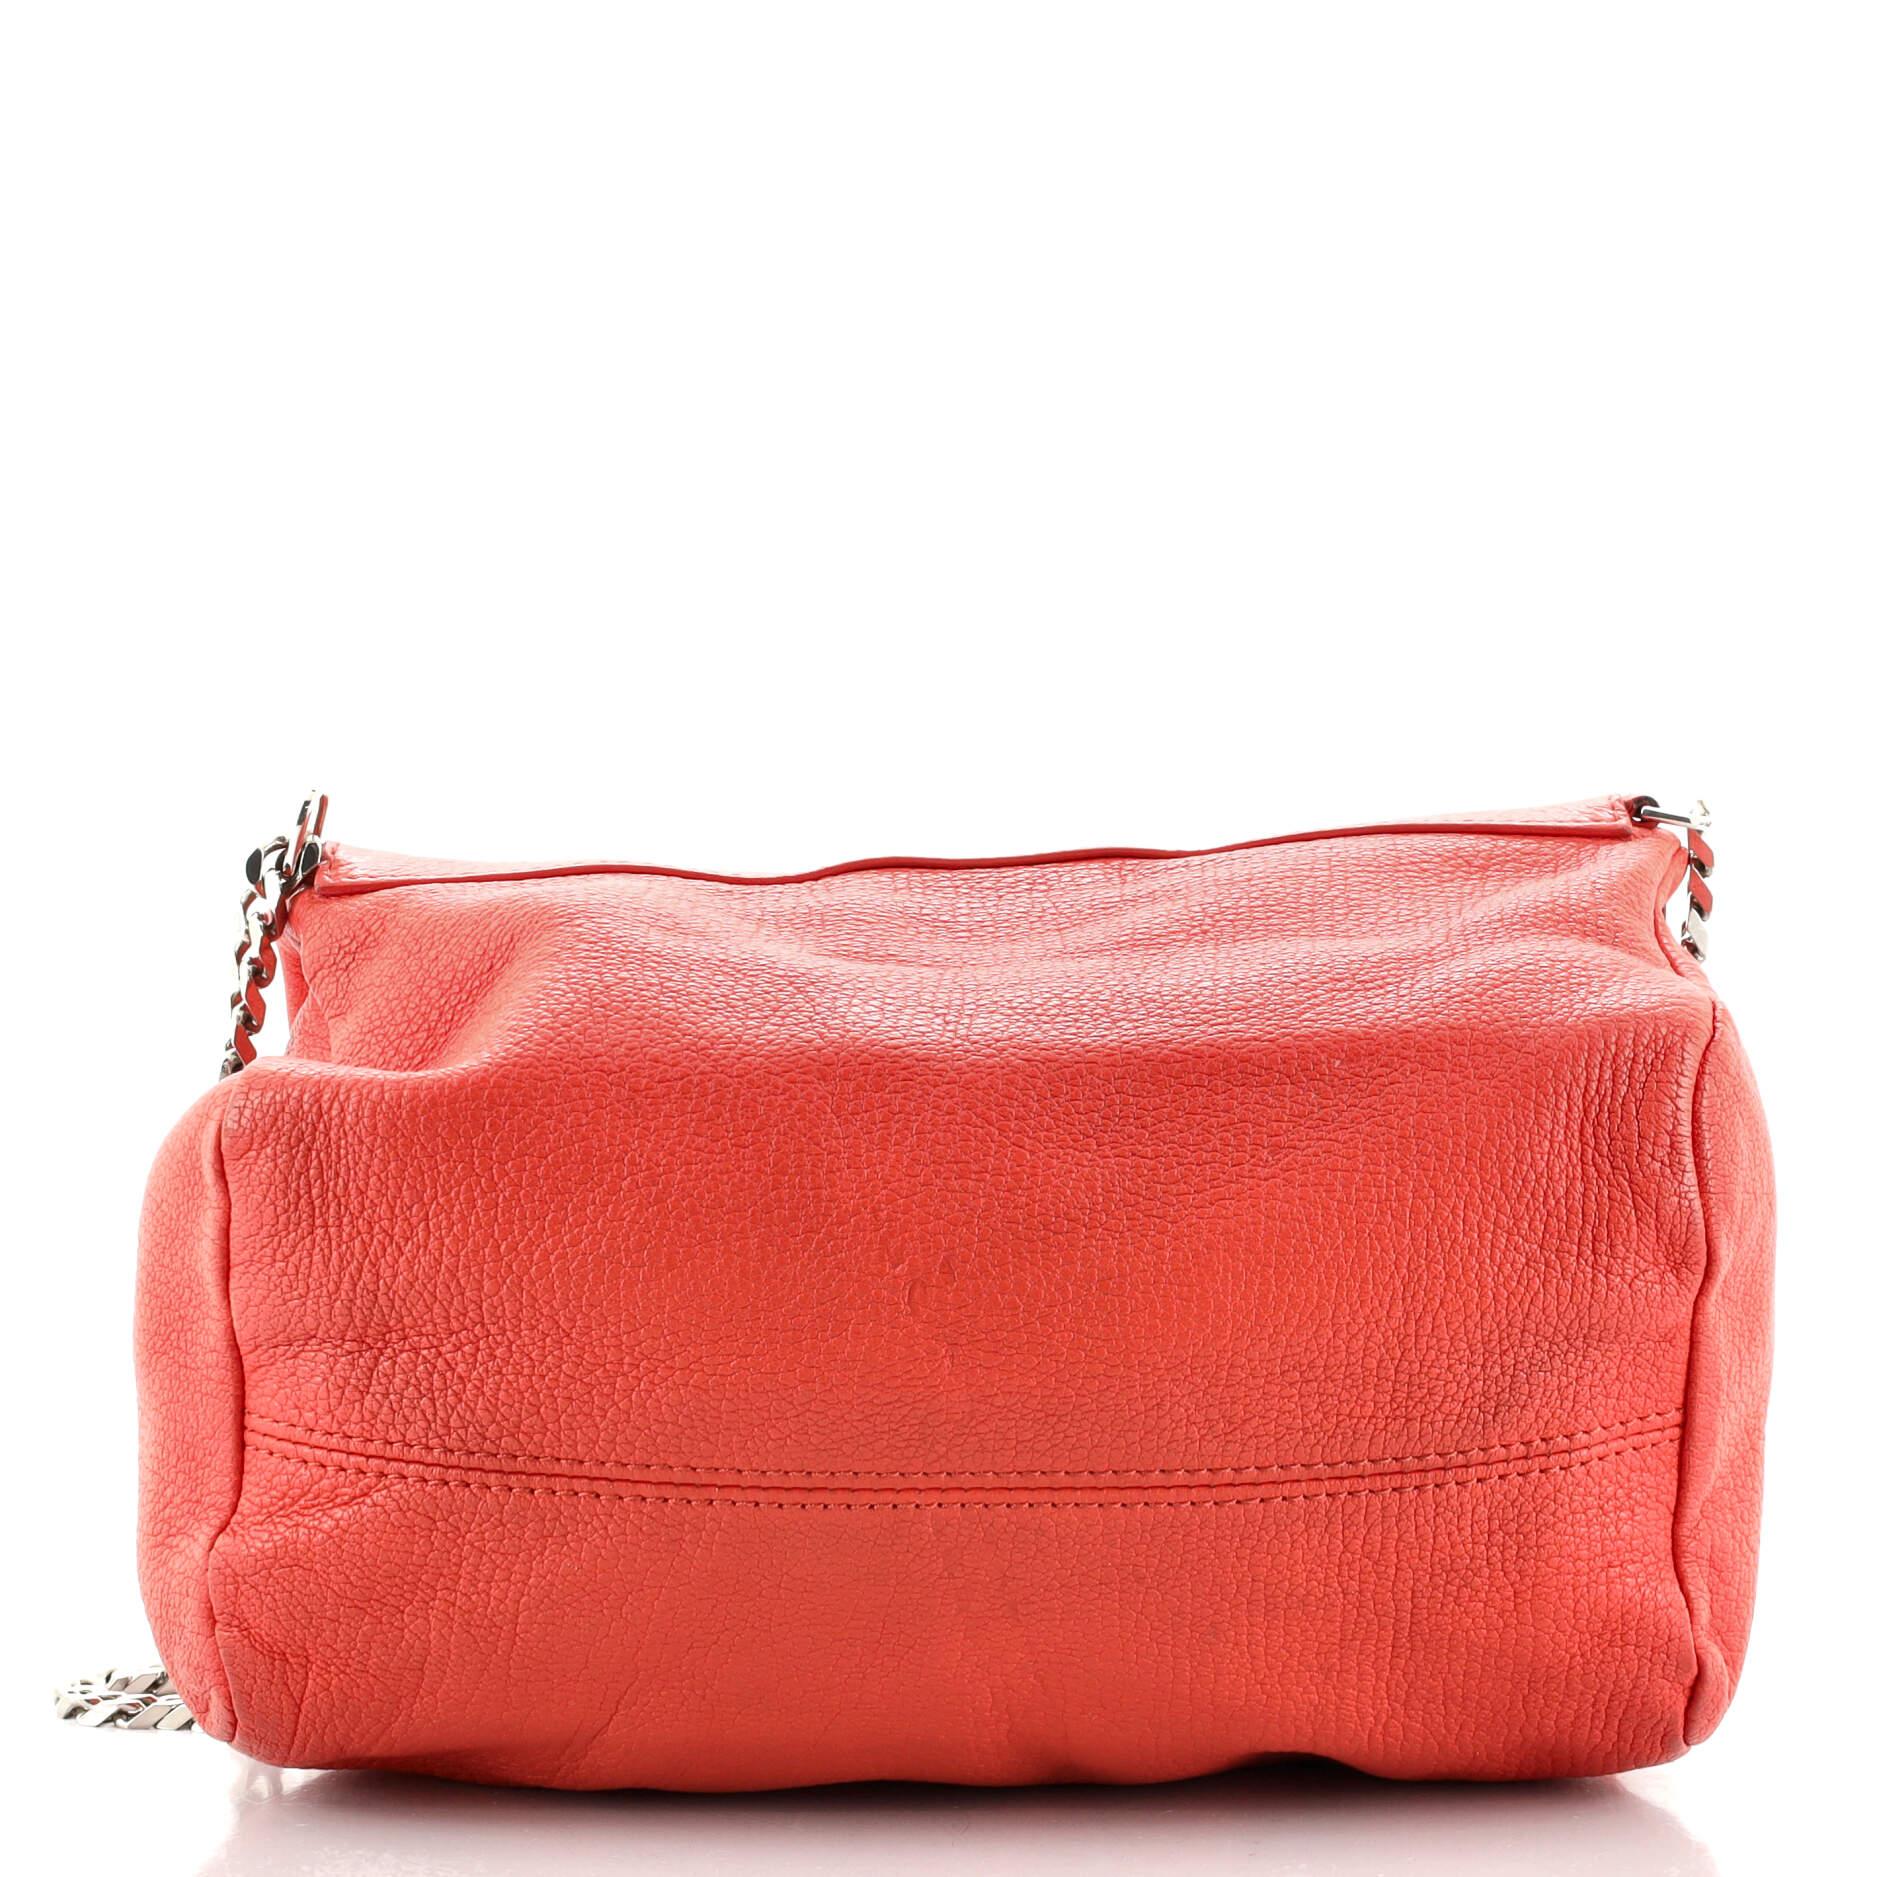 Red Givenchy Pandora Chain Bag Leather Mini